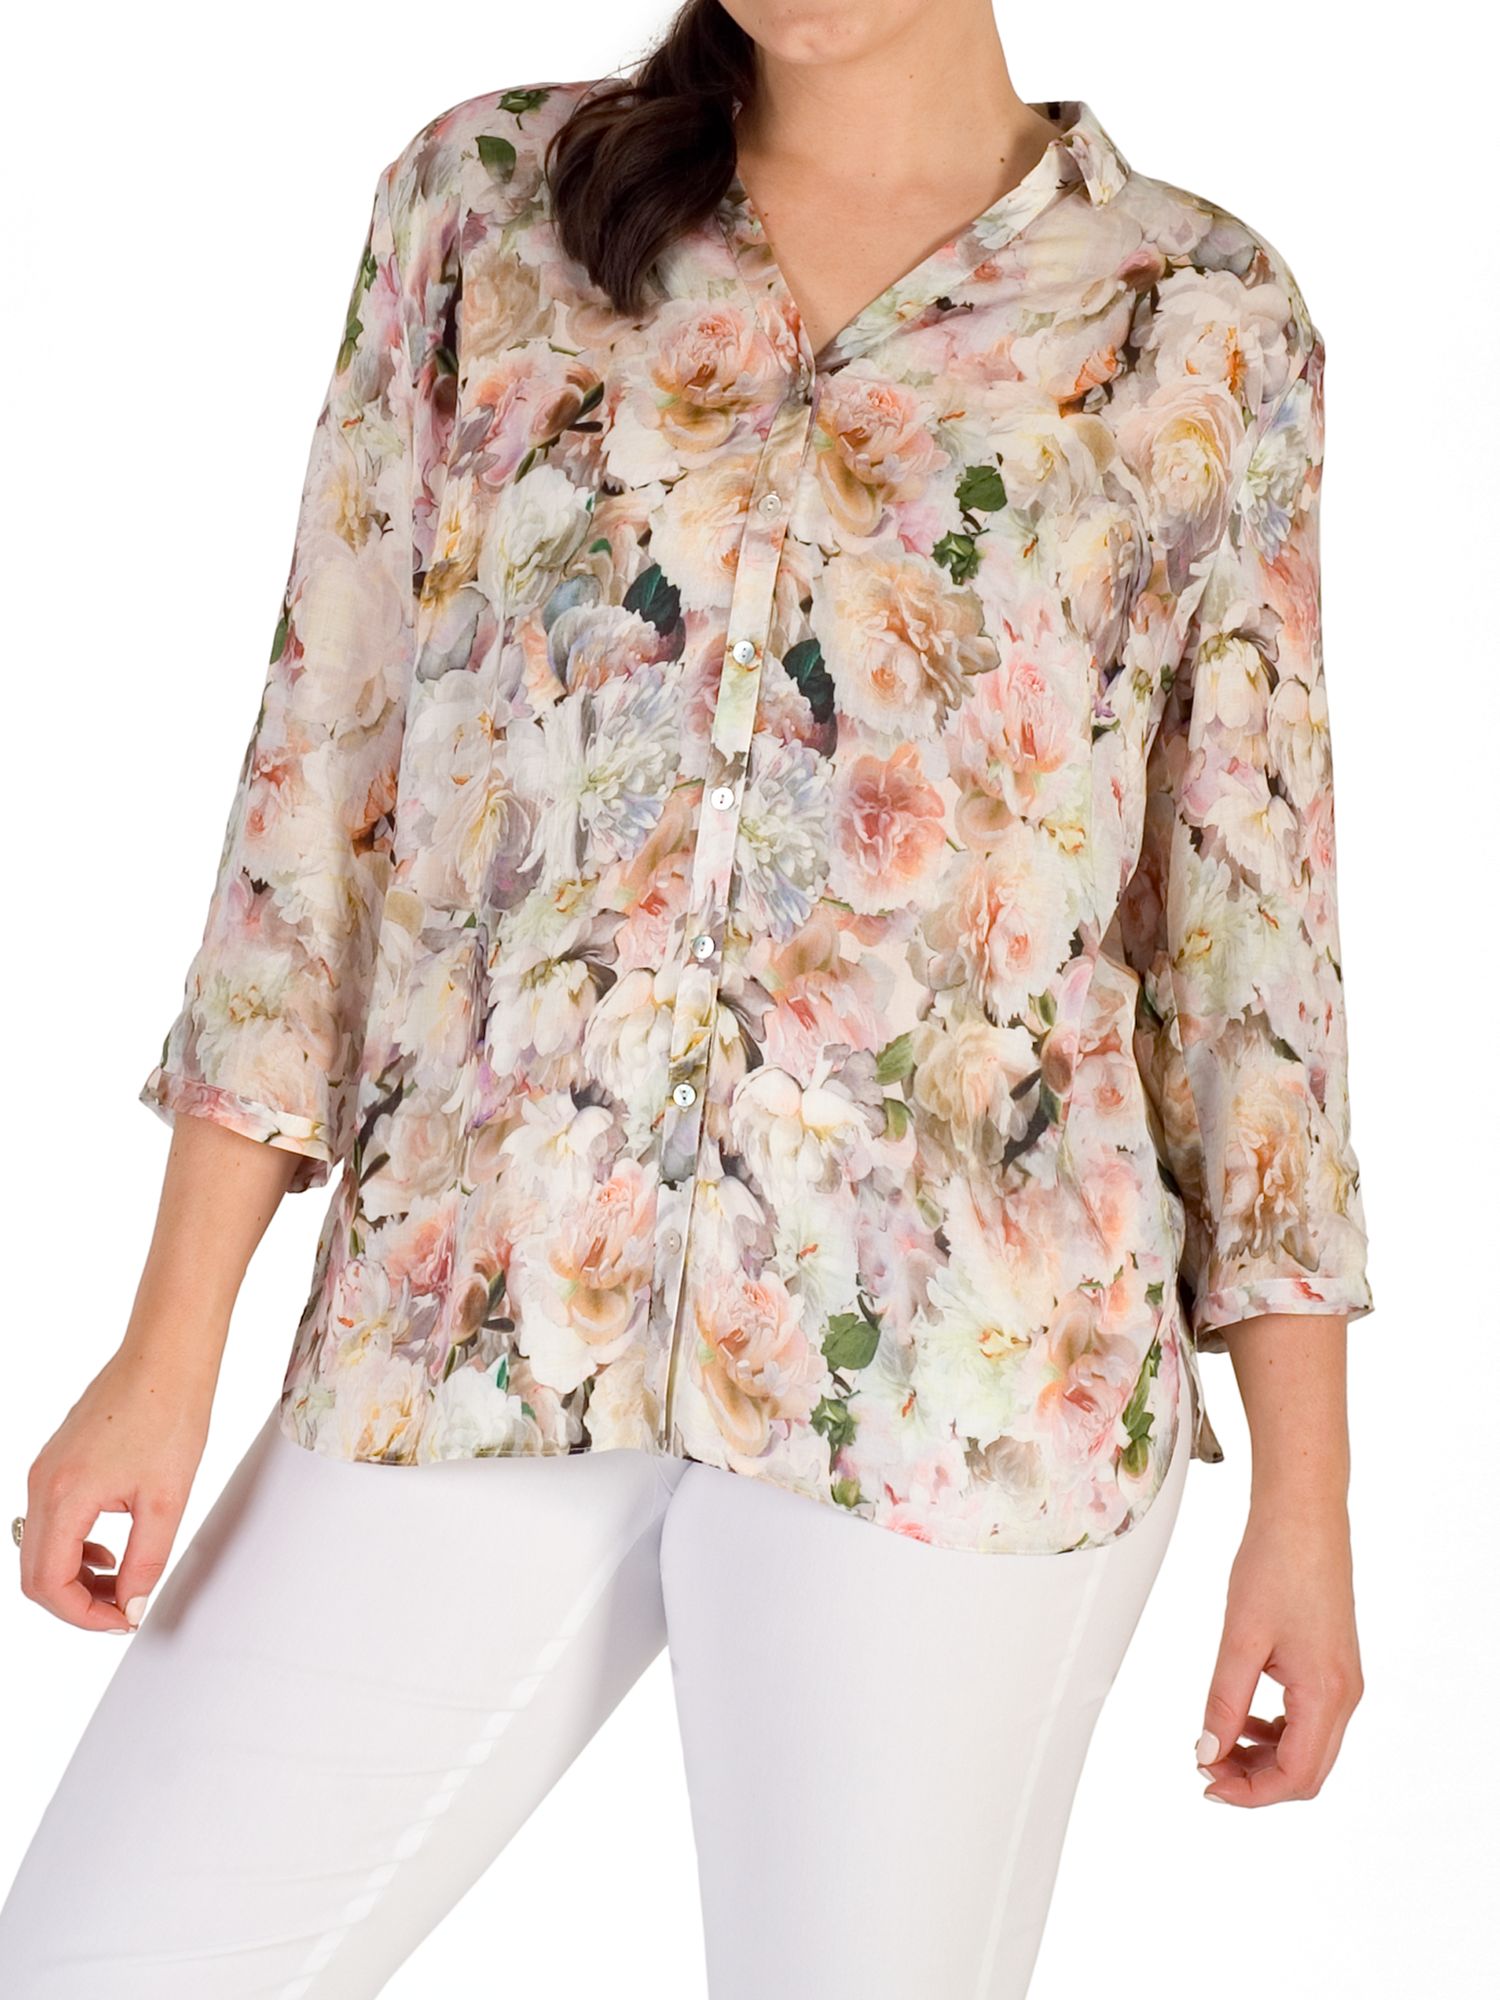 Chesca Floral Shirt, Multi